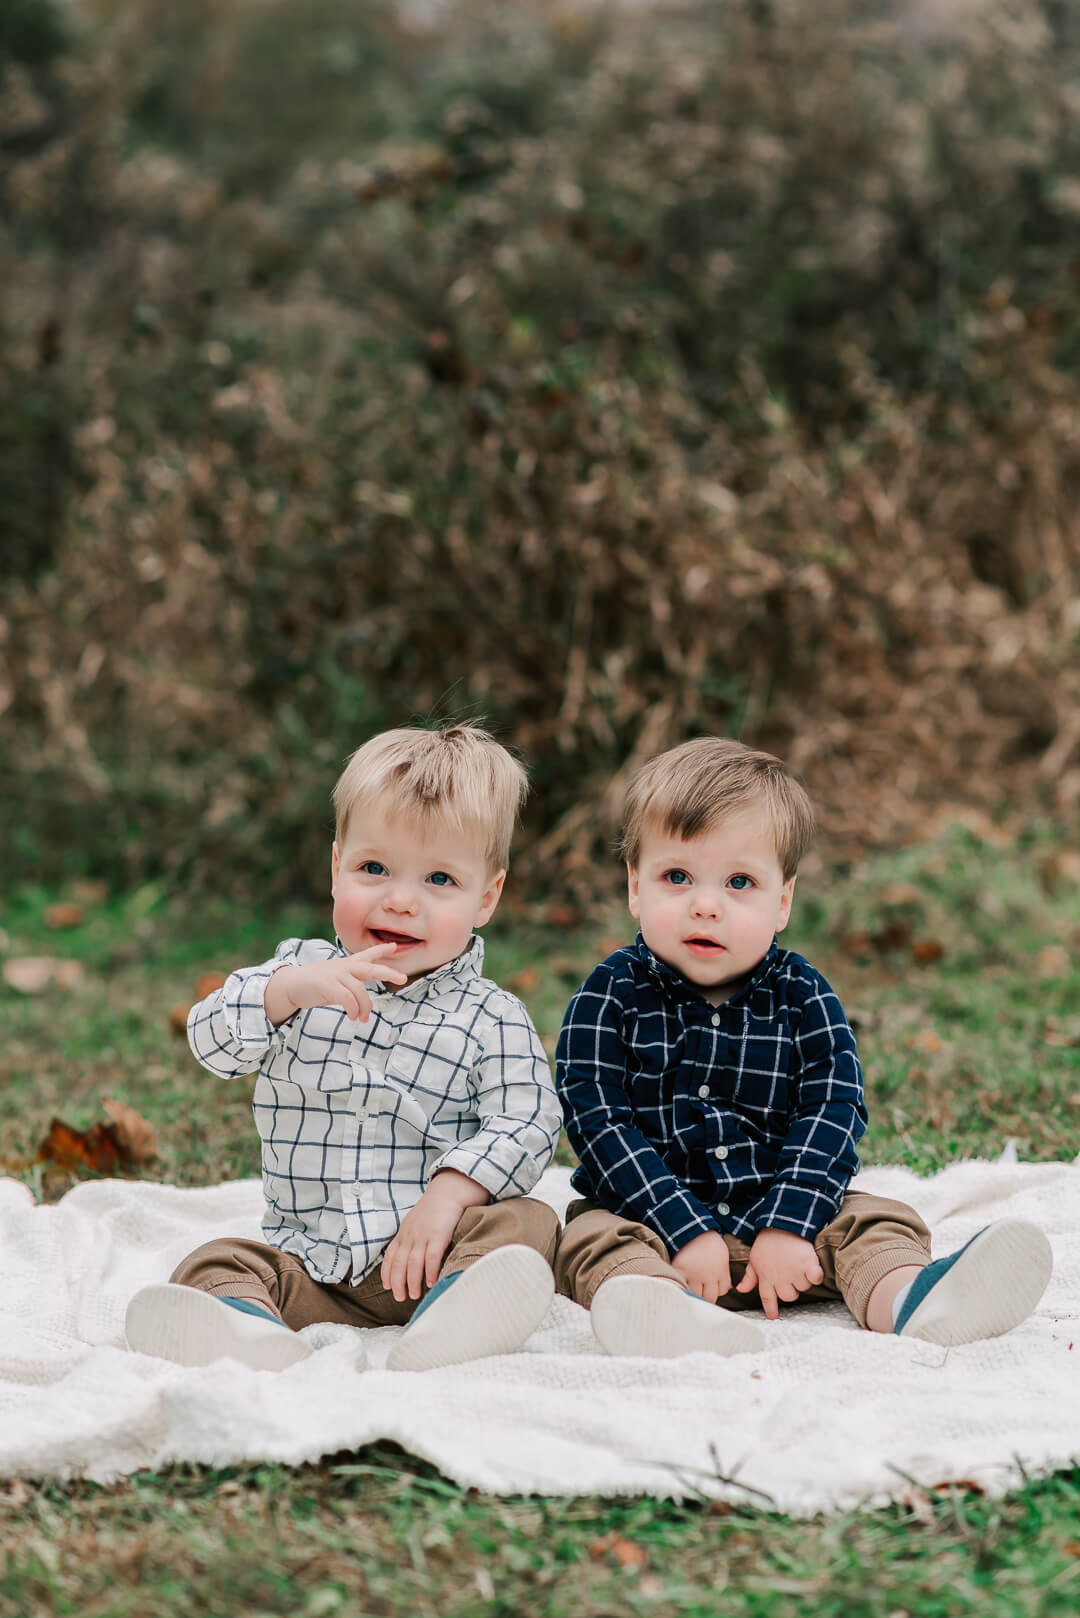 Two young toddler boys sit on a picnic blanket in a park